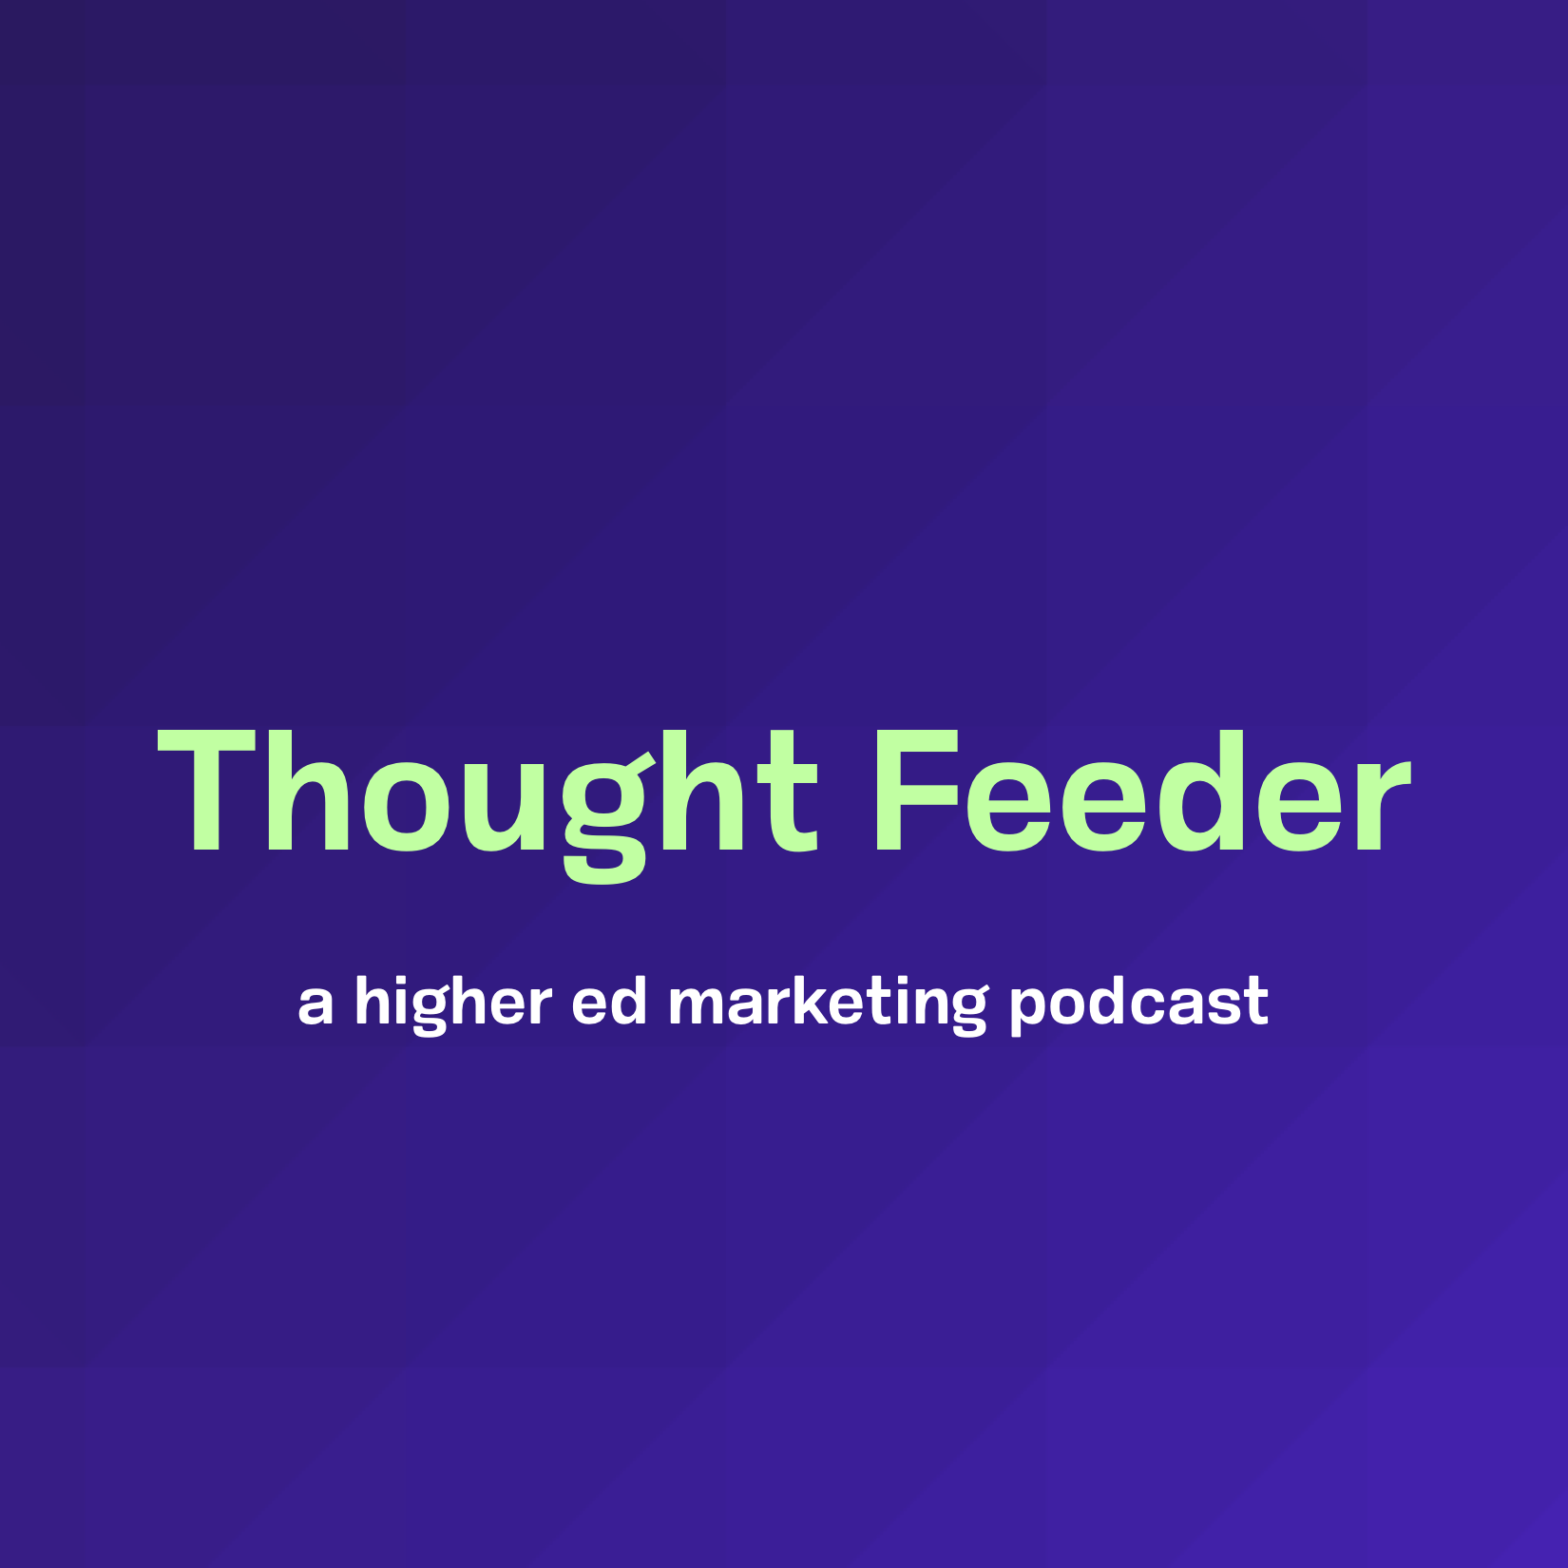 Thought Feeder. A higher ed marketing podcast